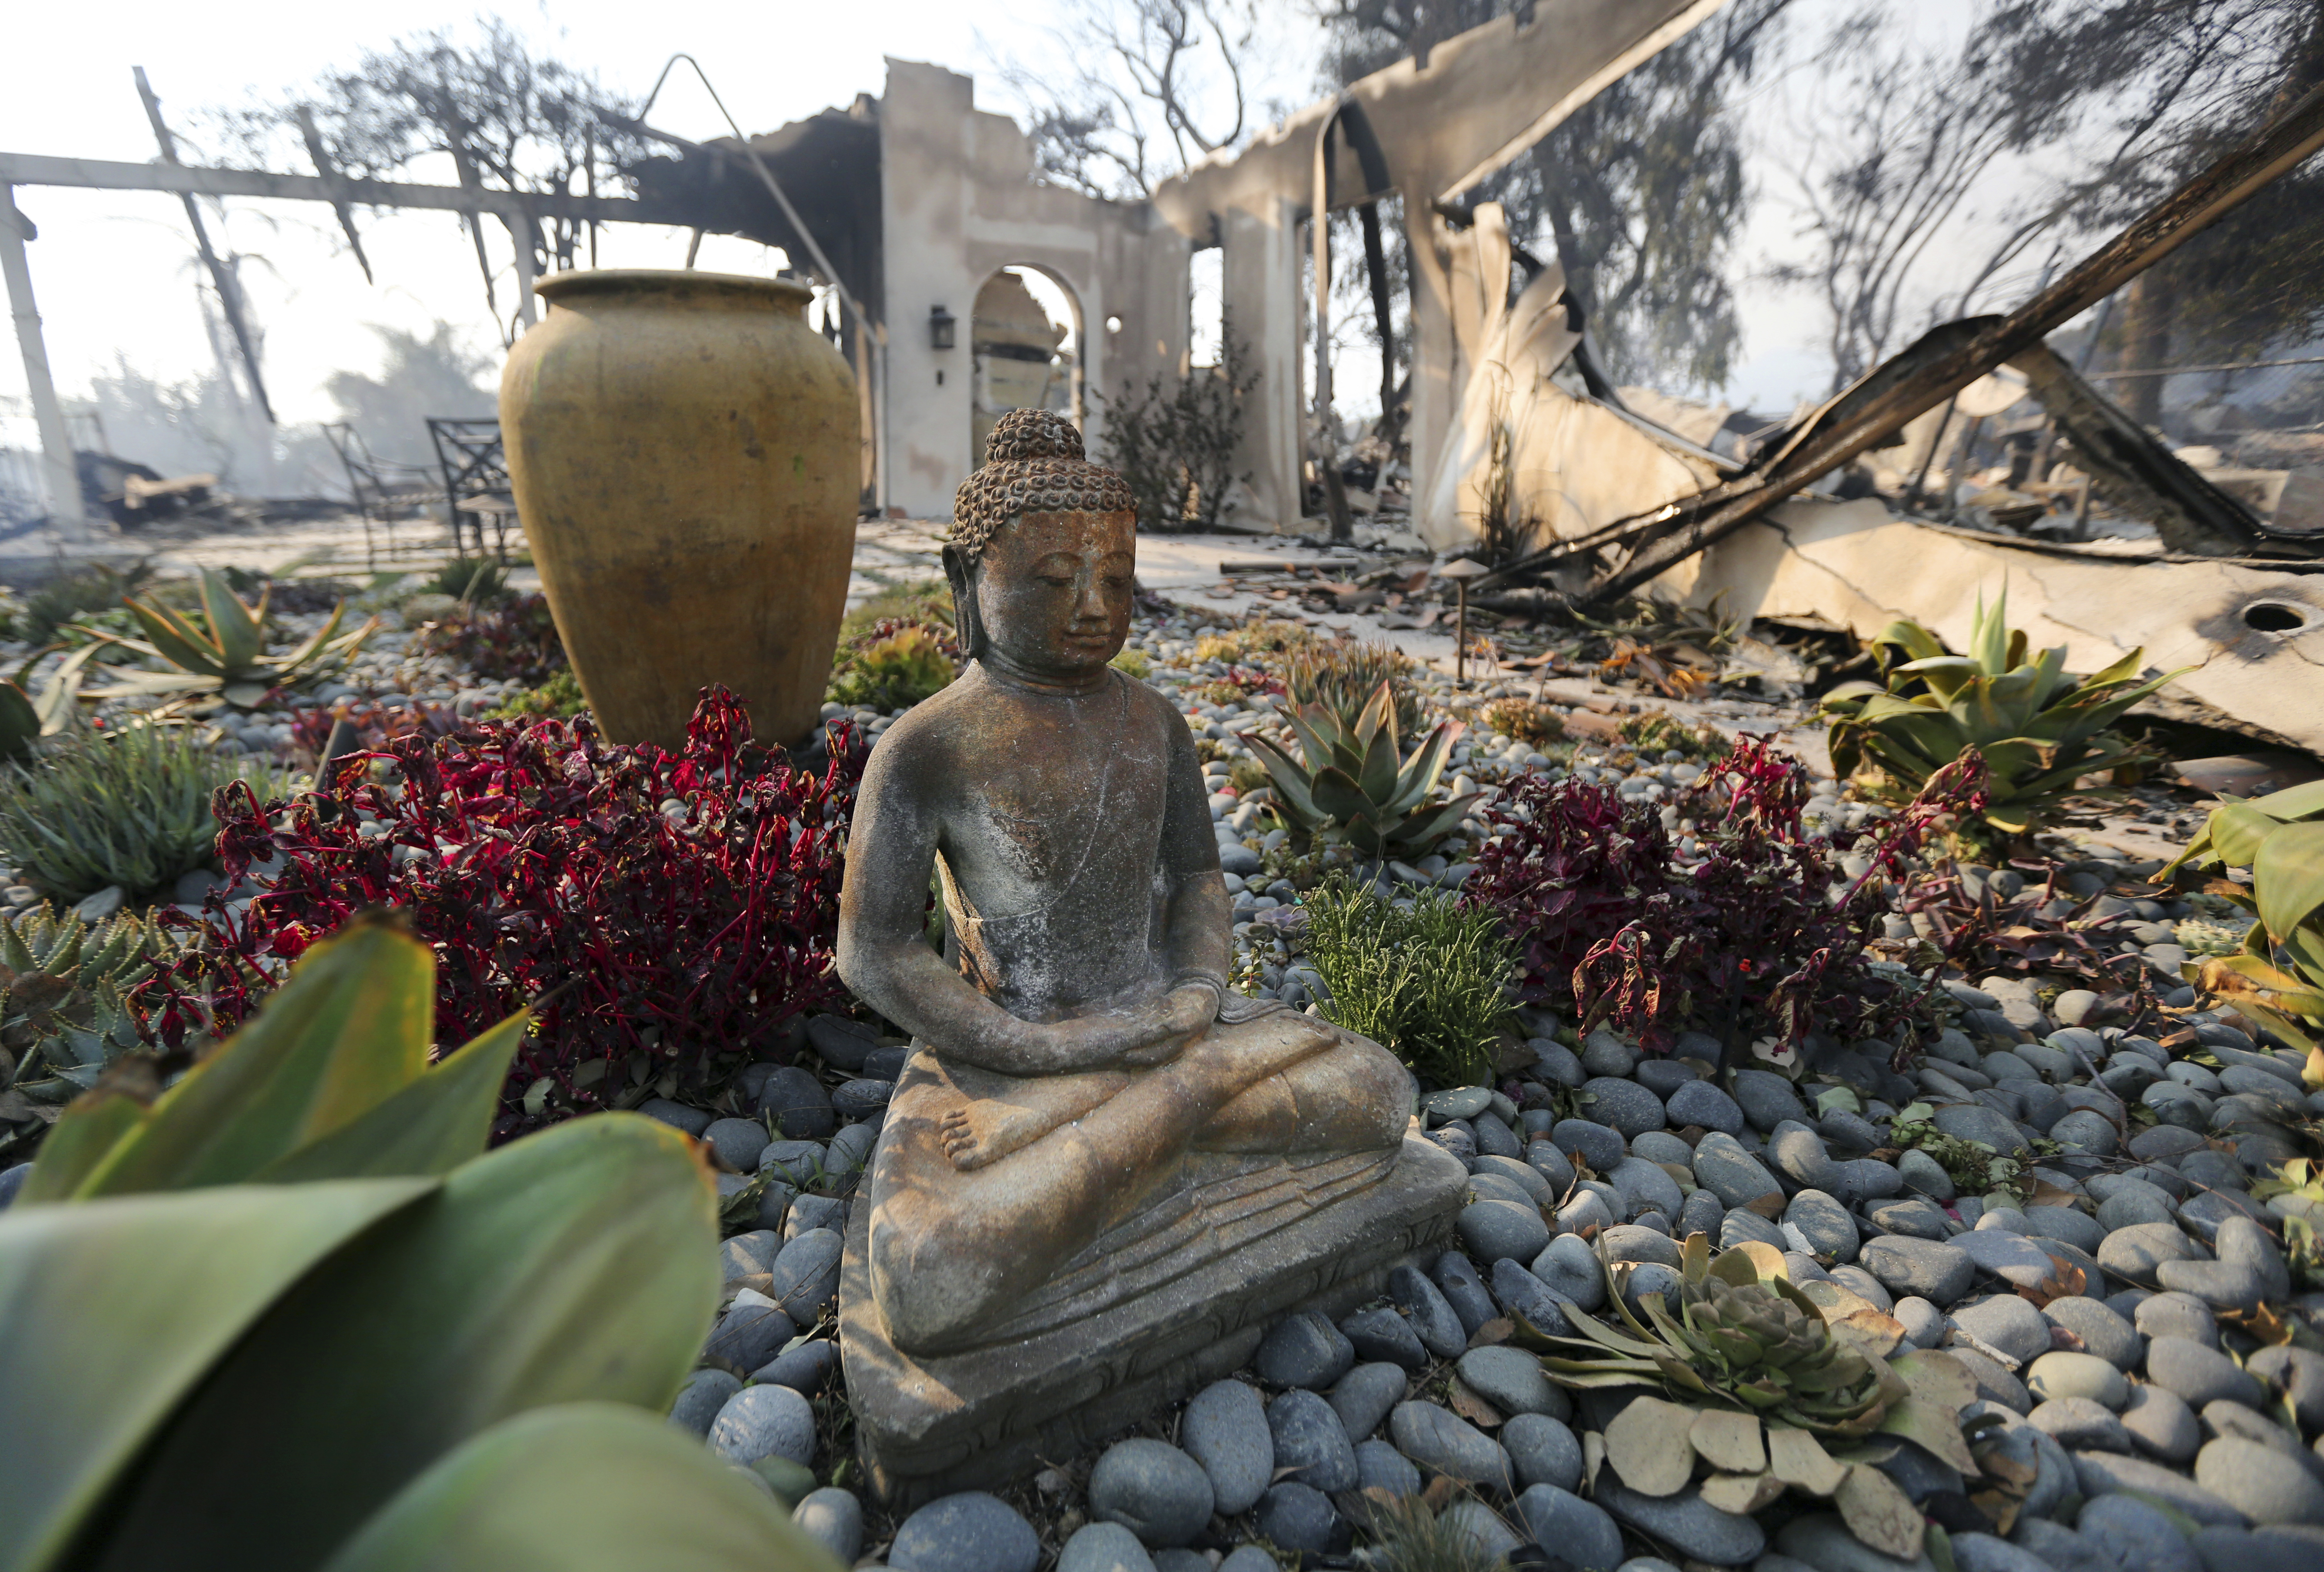 California wildfires: Residents take stock of what they lost, and what remains